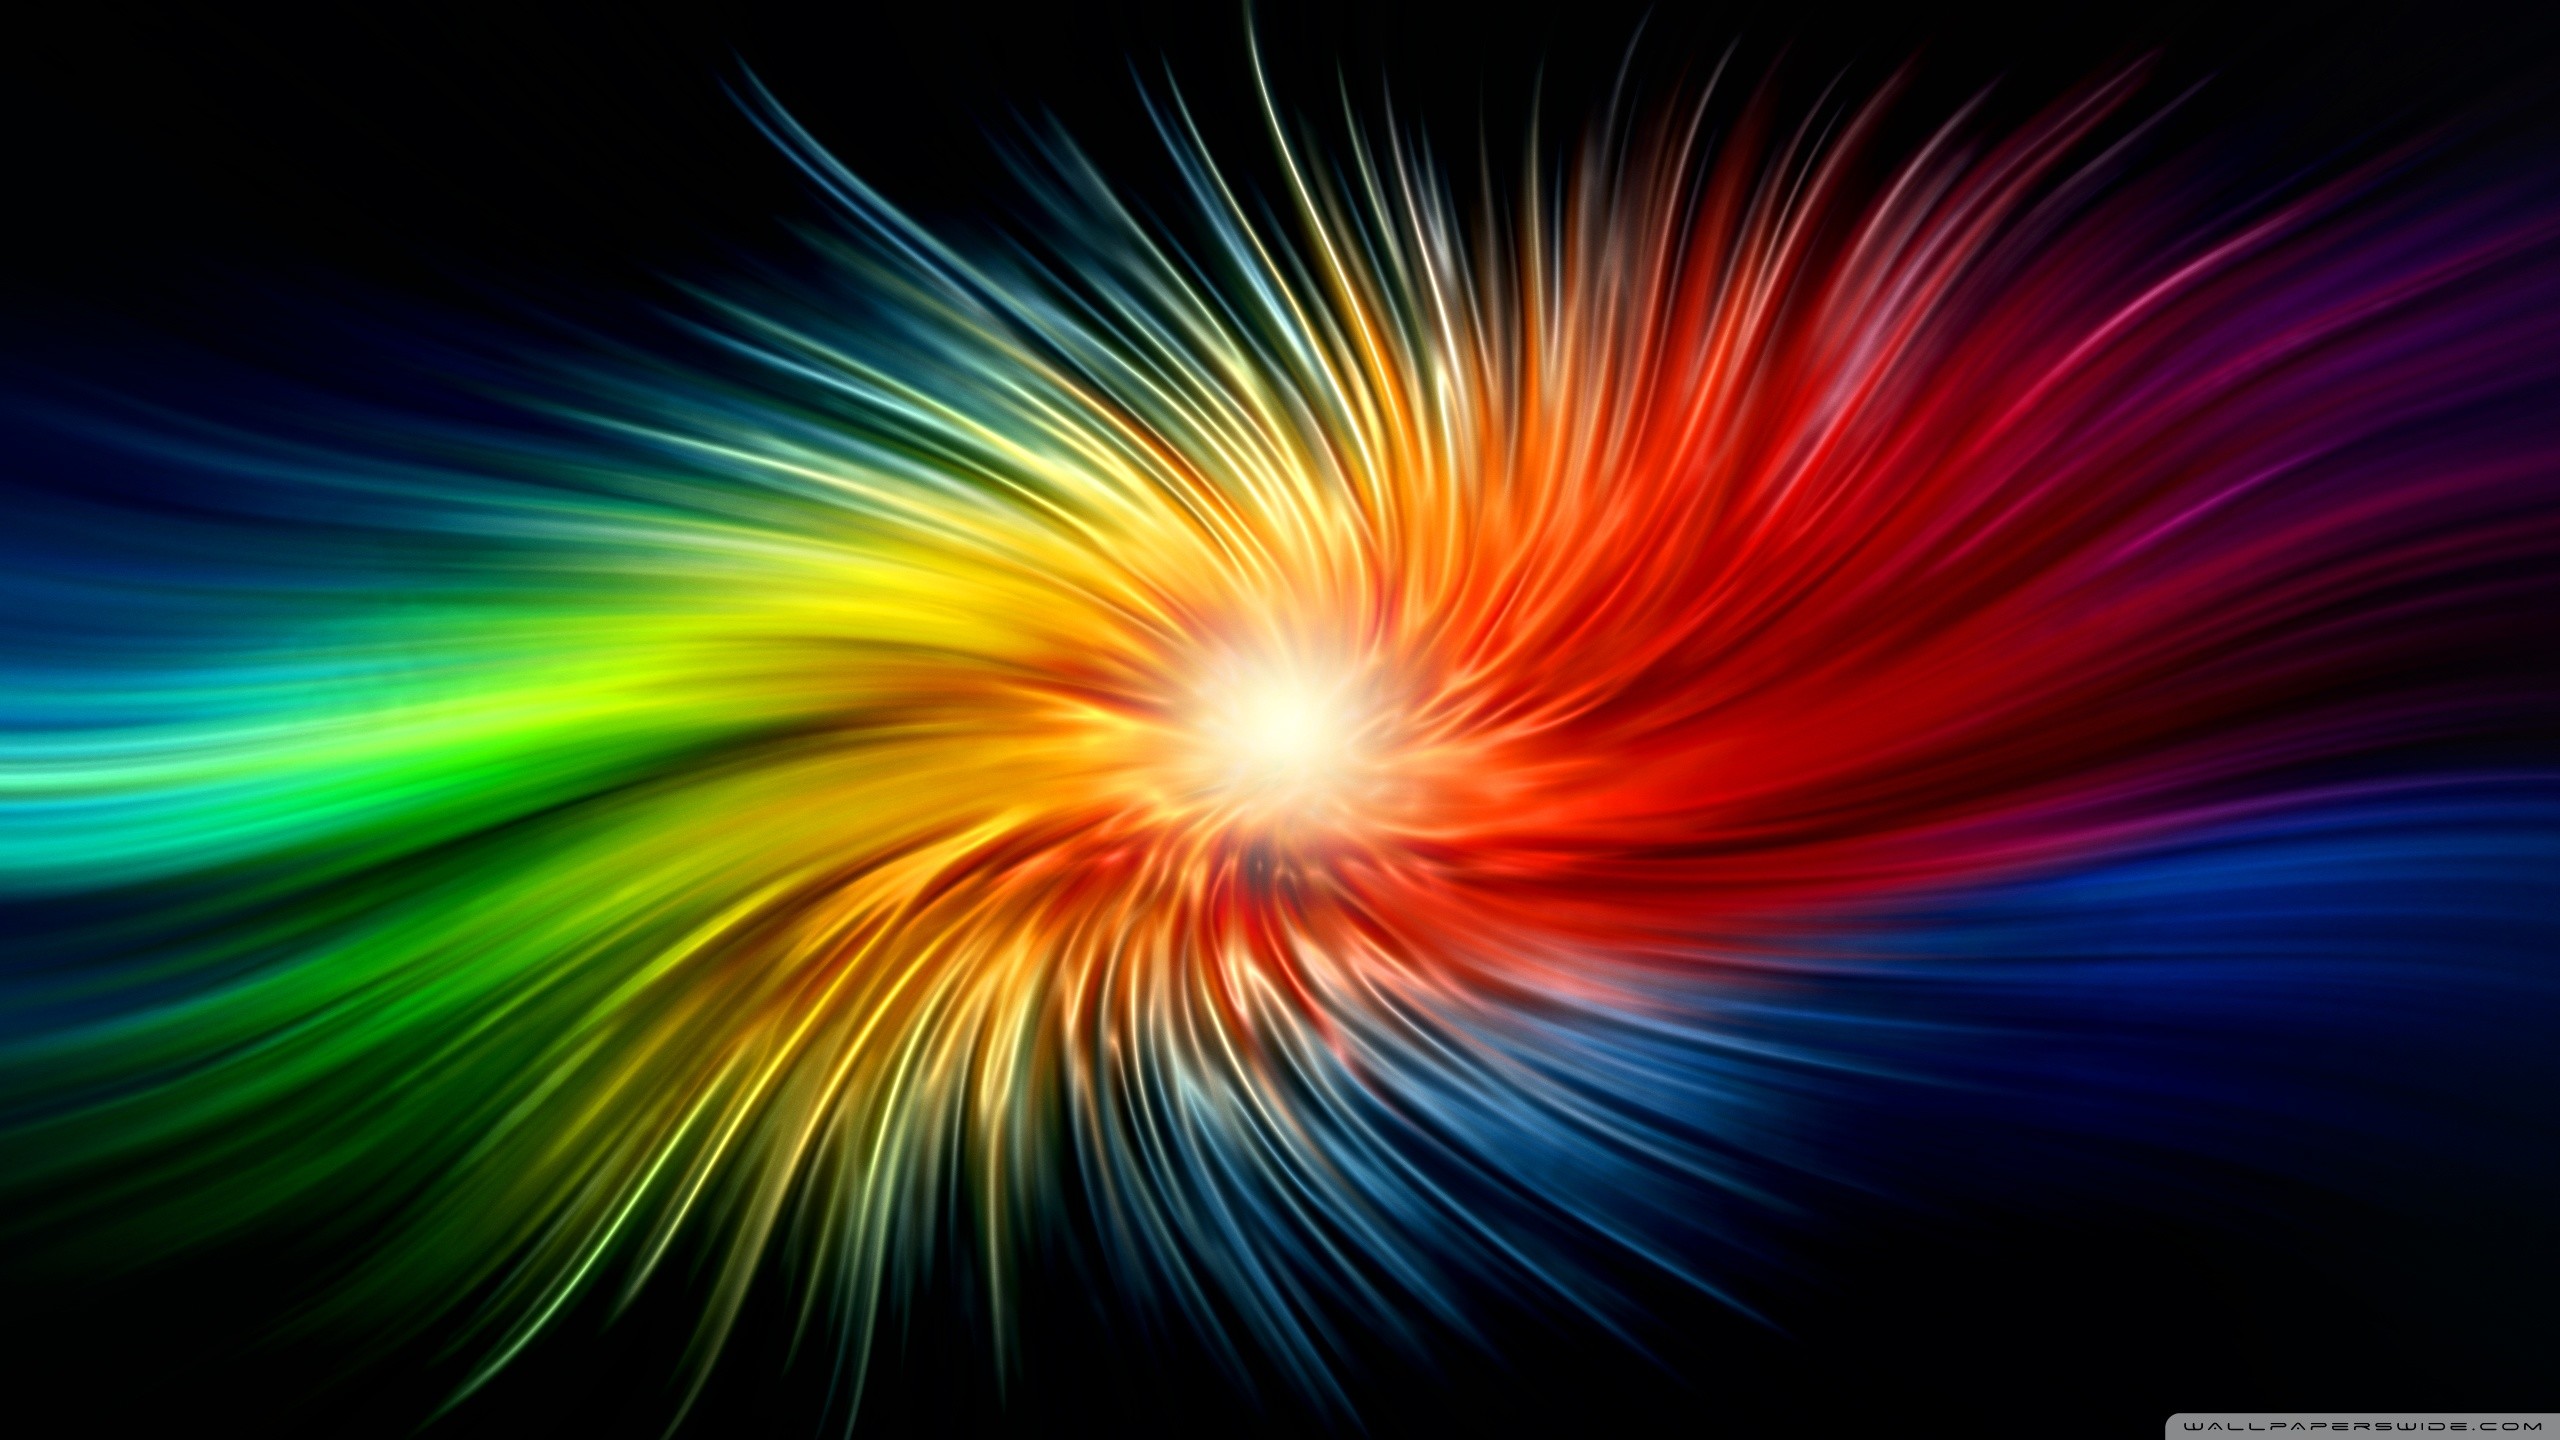 Hd Wallpapers 16 9 Resolution Page - Colorful Backgrounds Hd - 2560x1440  Wallpaper 